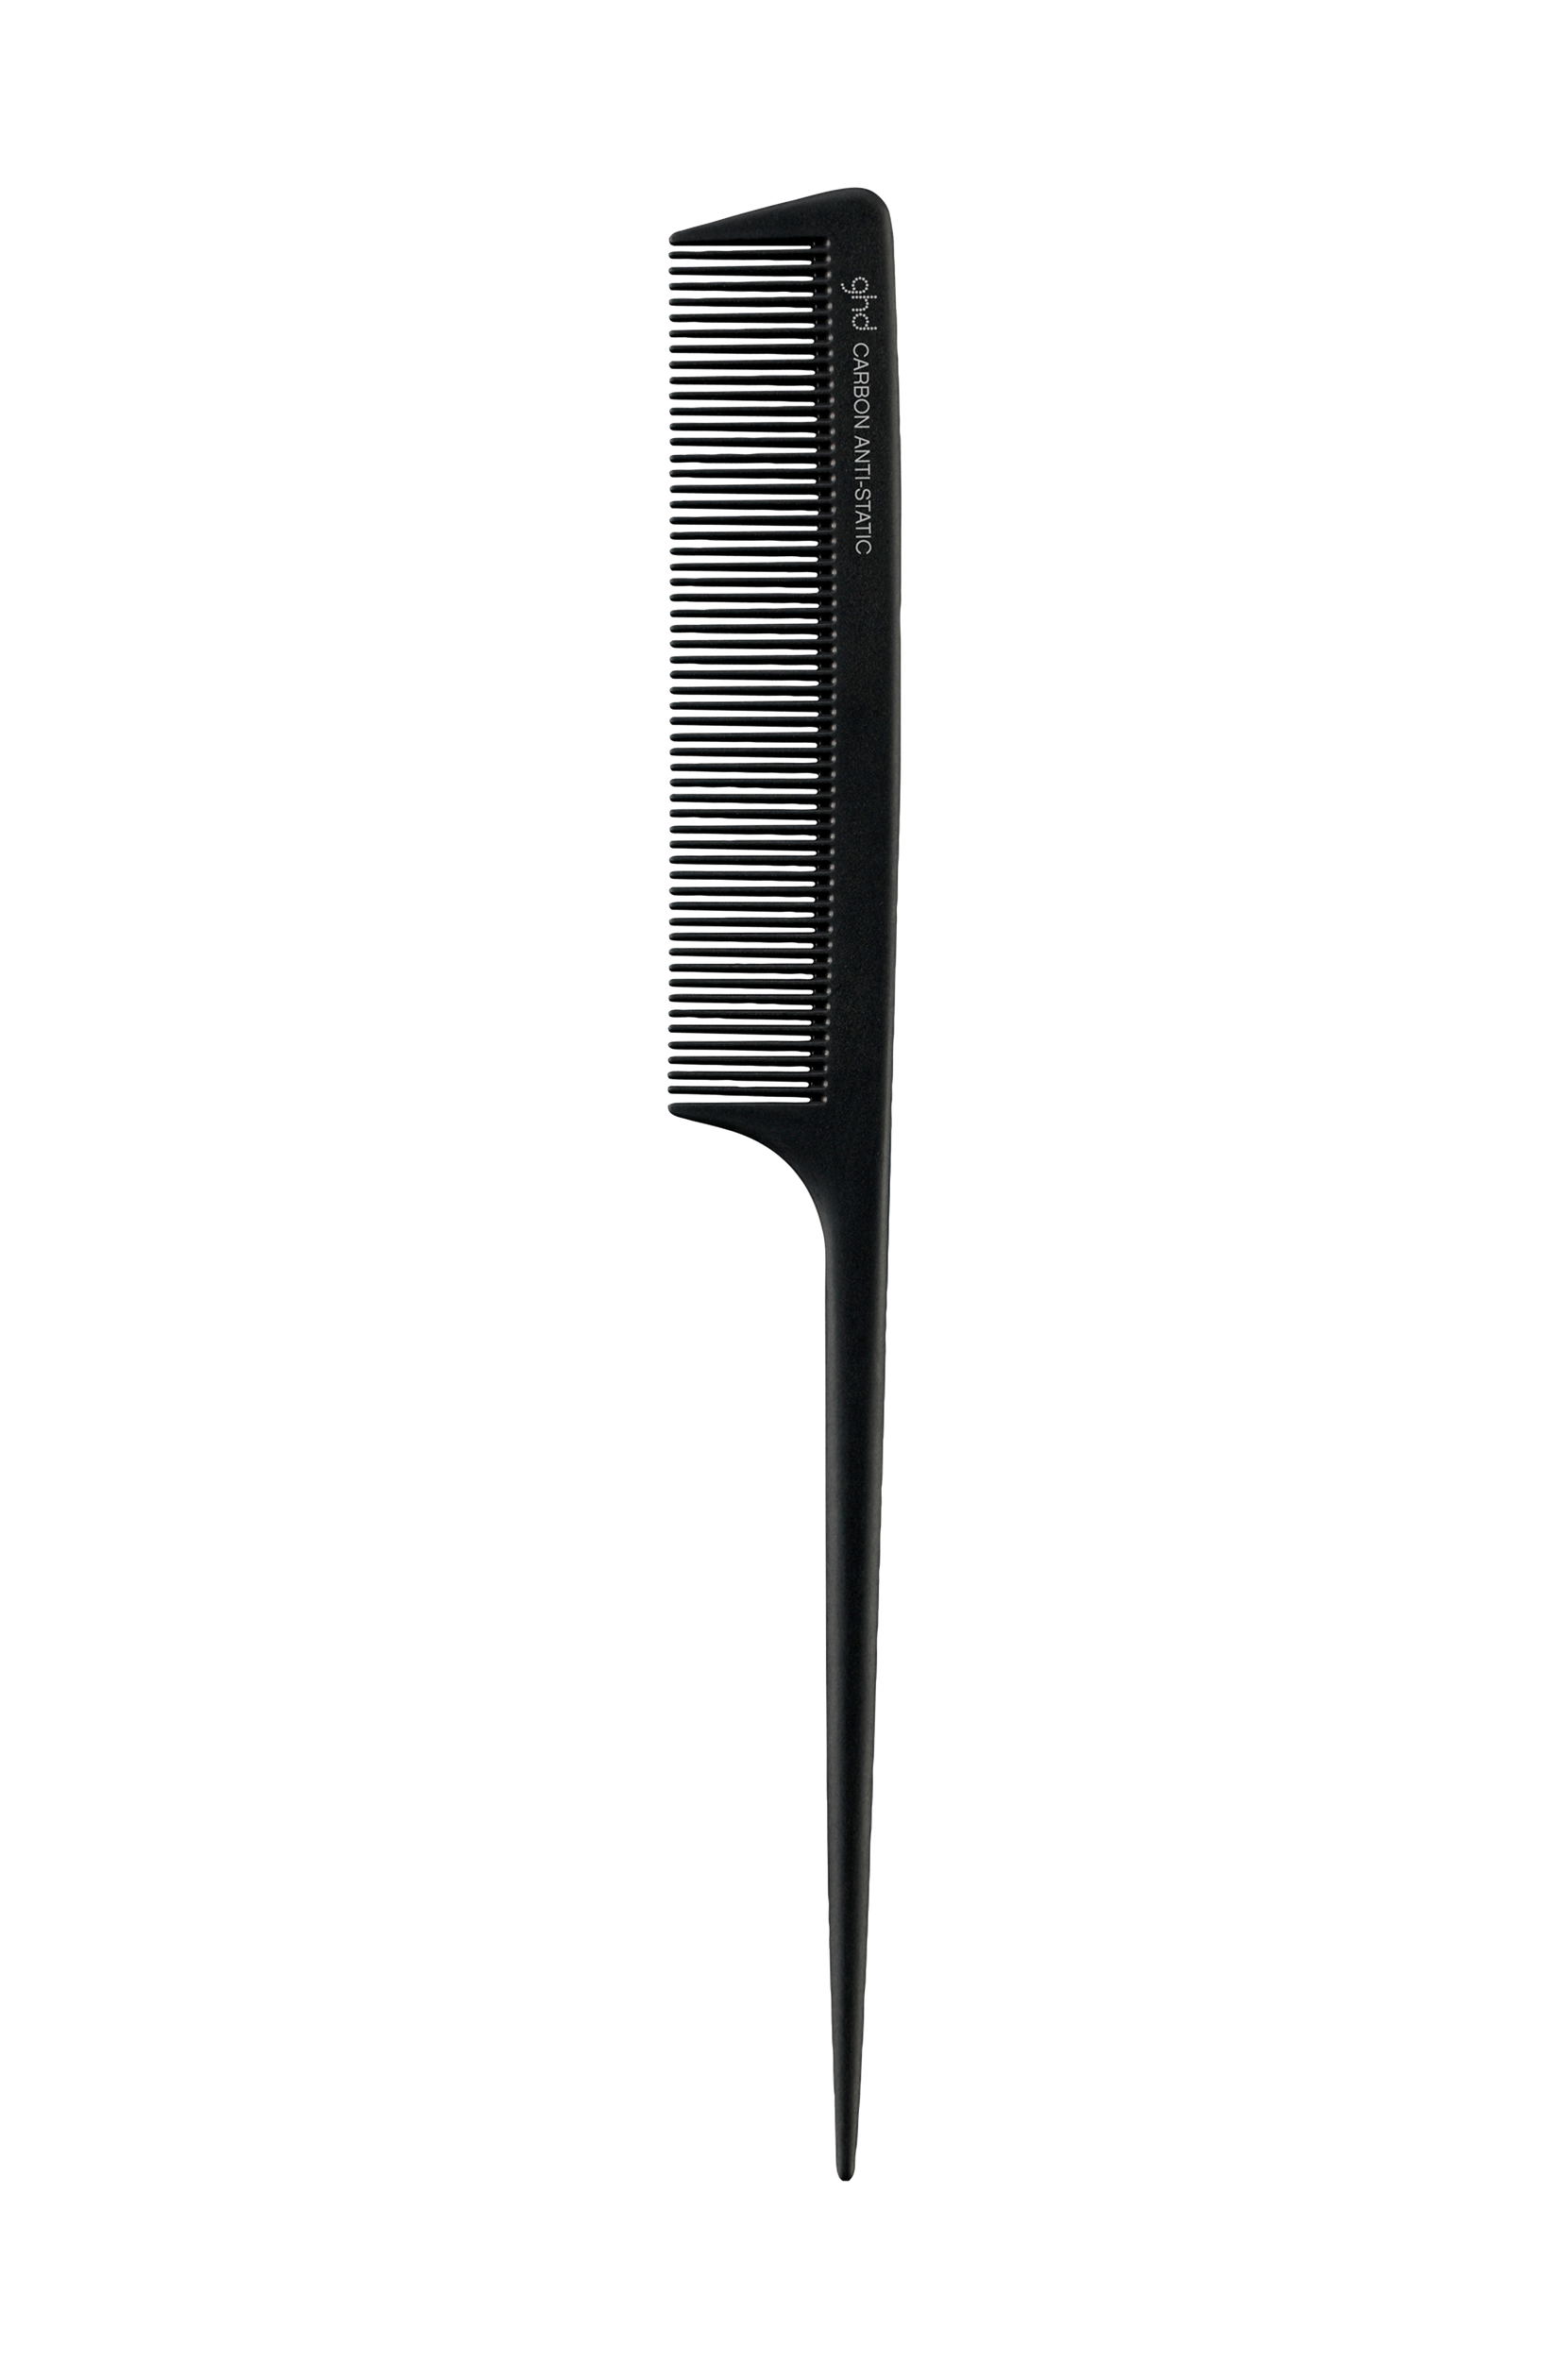 Carbon Tail Comb (Sleeved), GHD